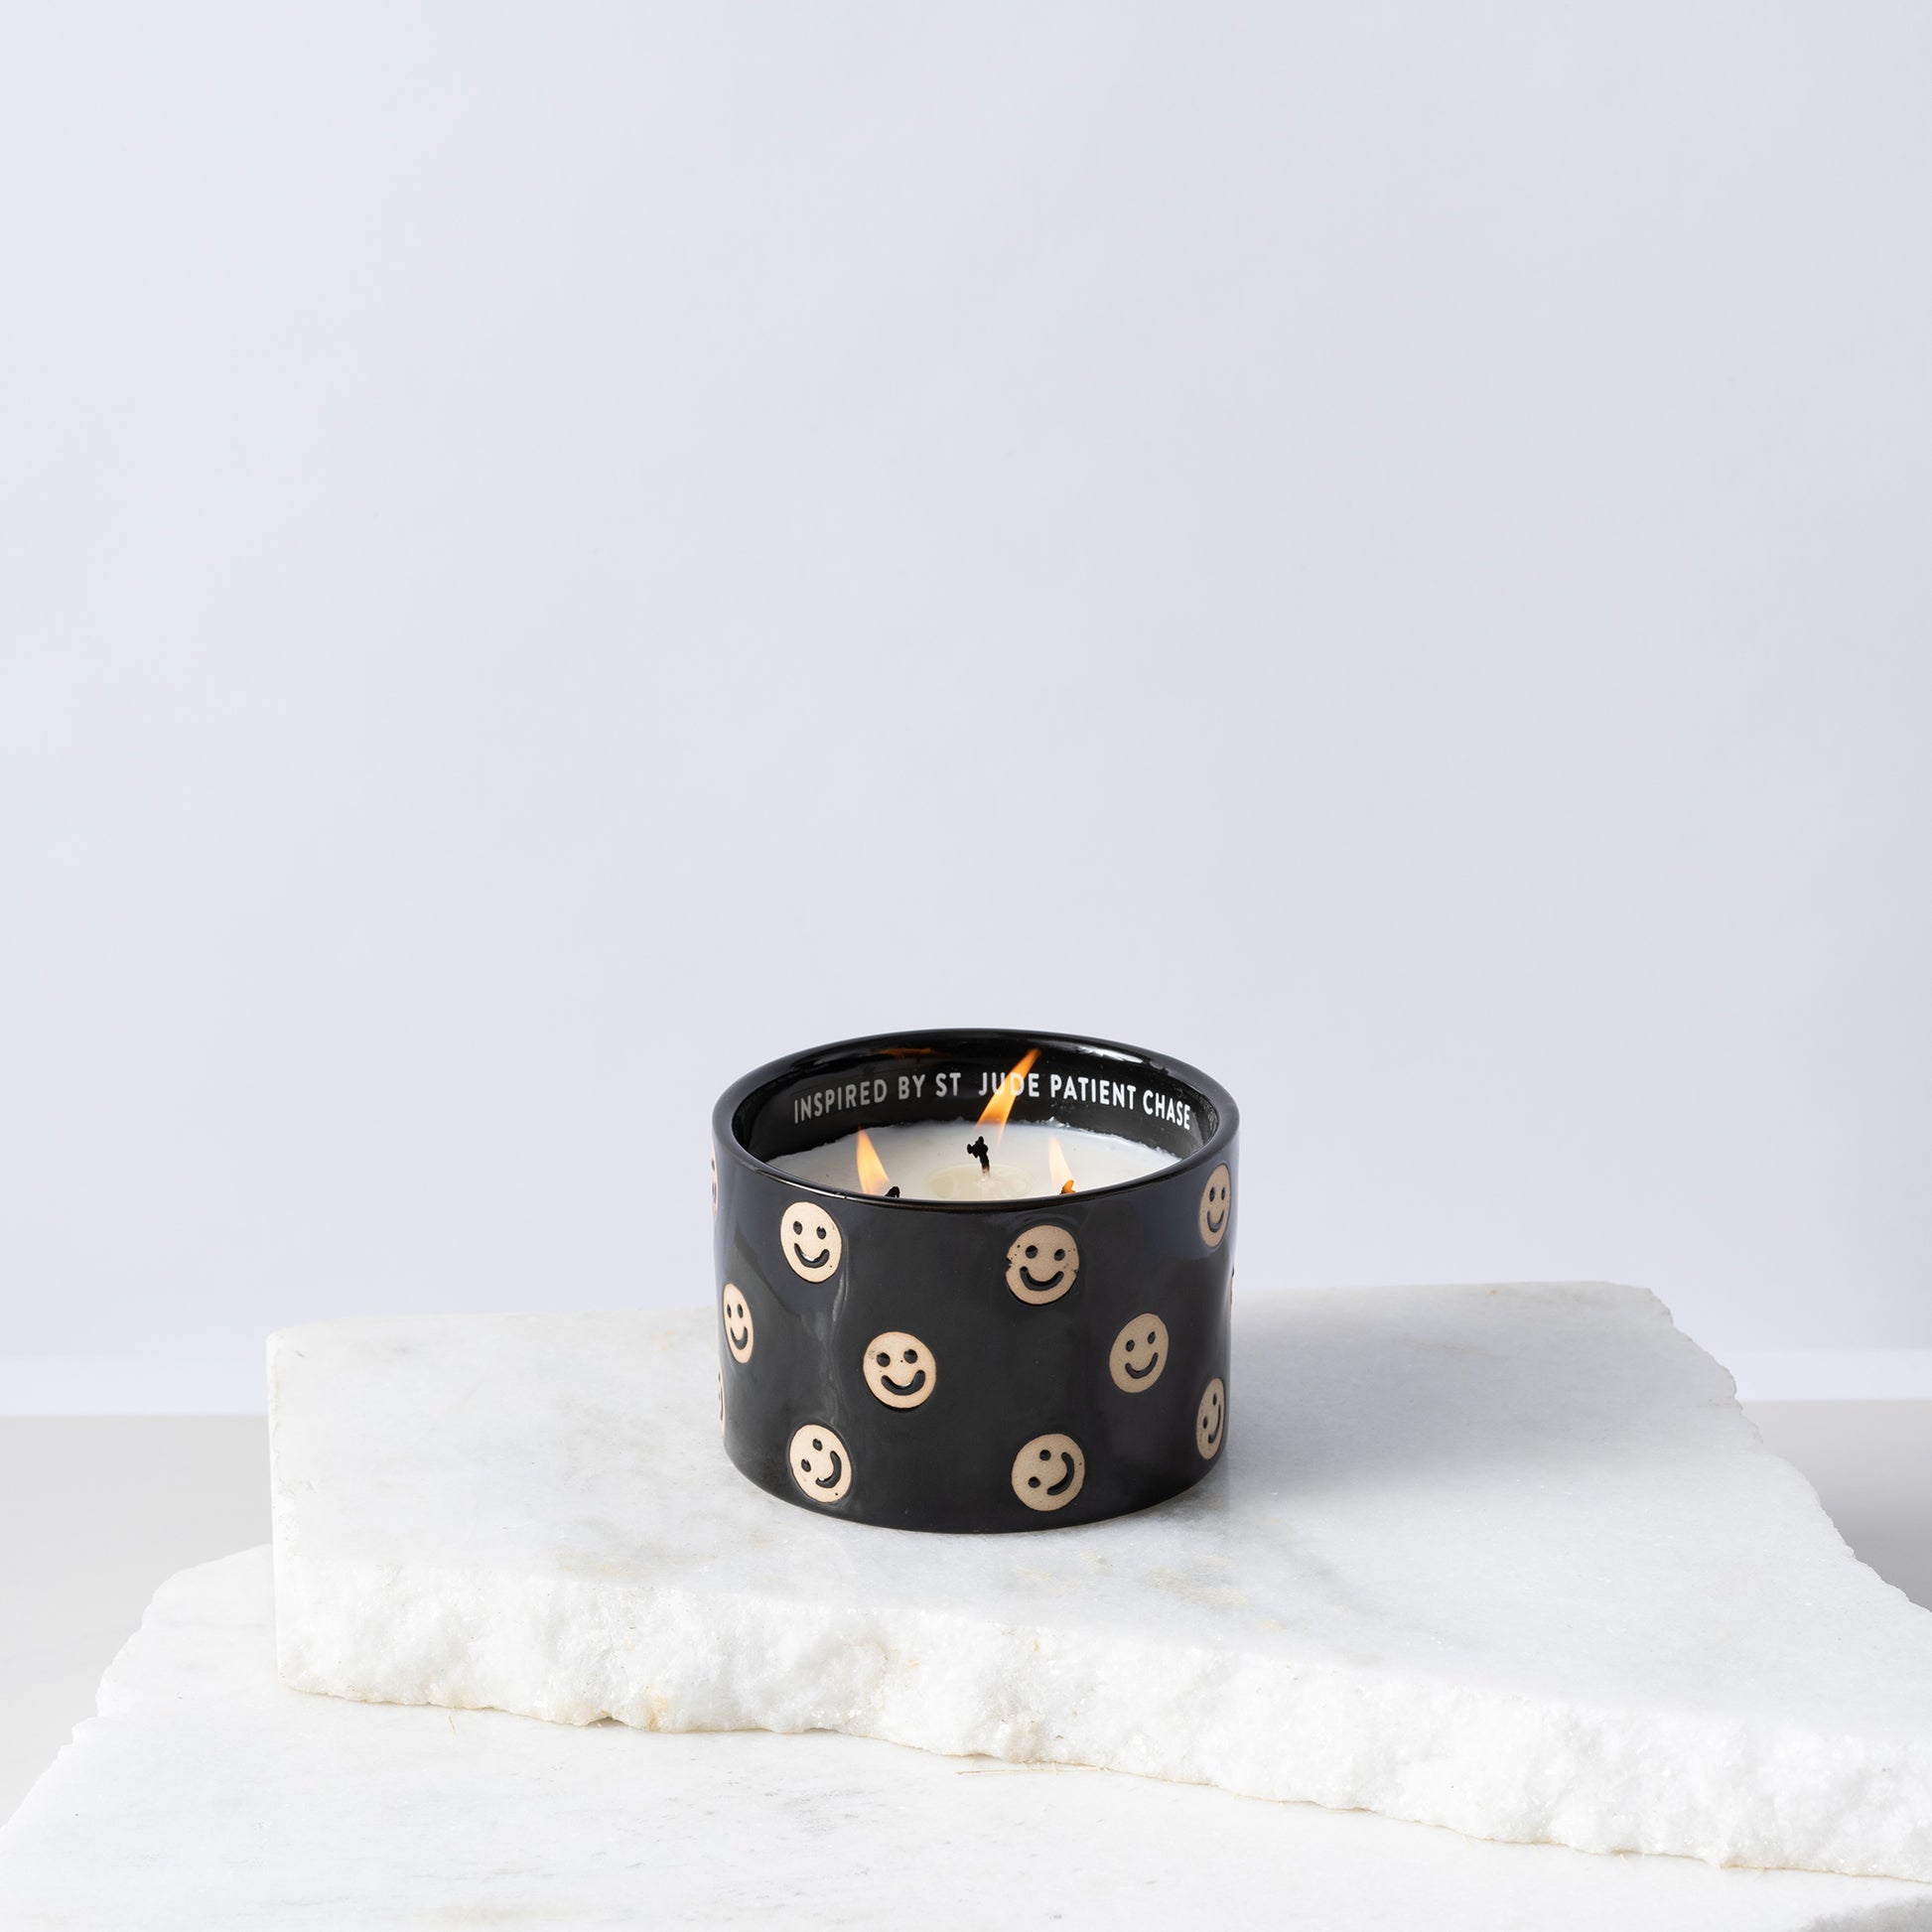 Black ceramic candle with smiley faces and white soy wax center with three wicks burning